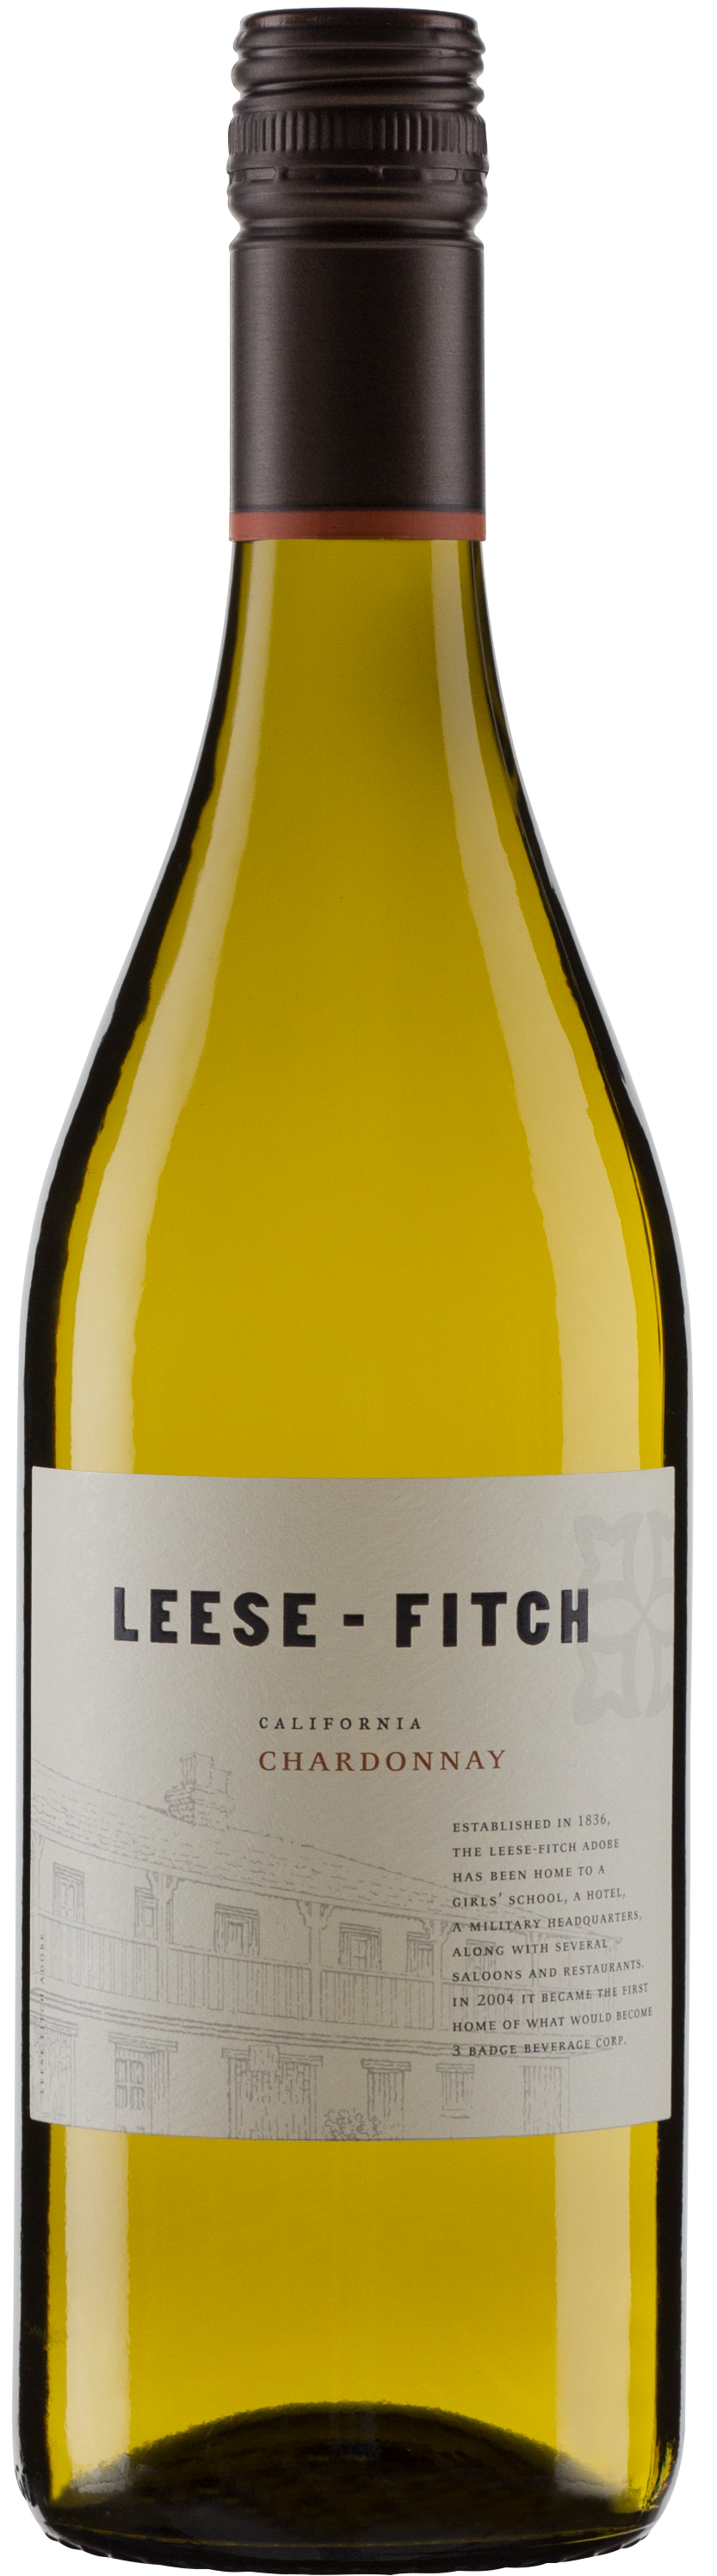 Leese-Fitch Chardonnay 2017